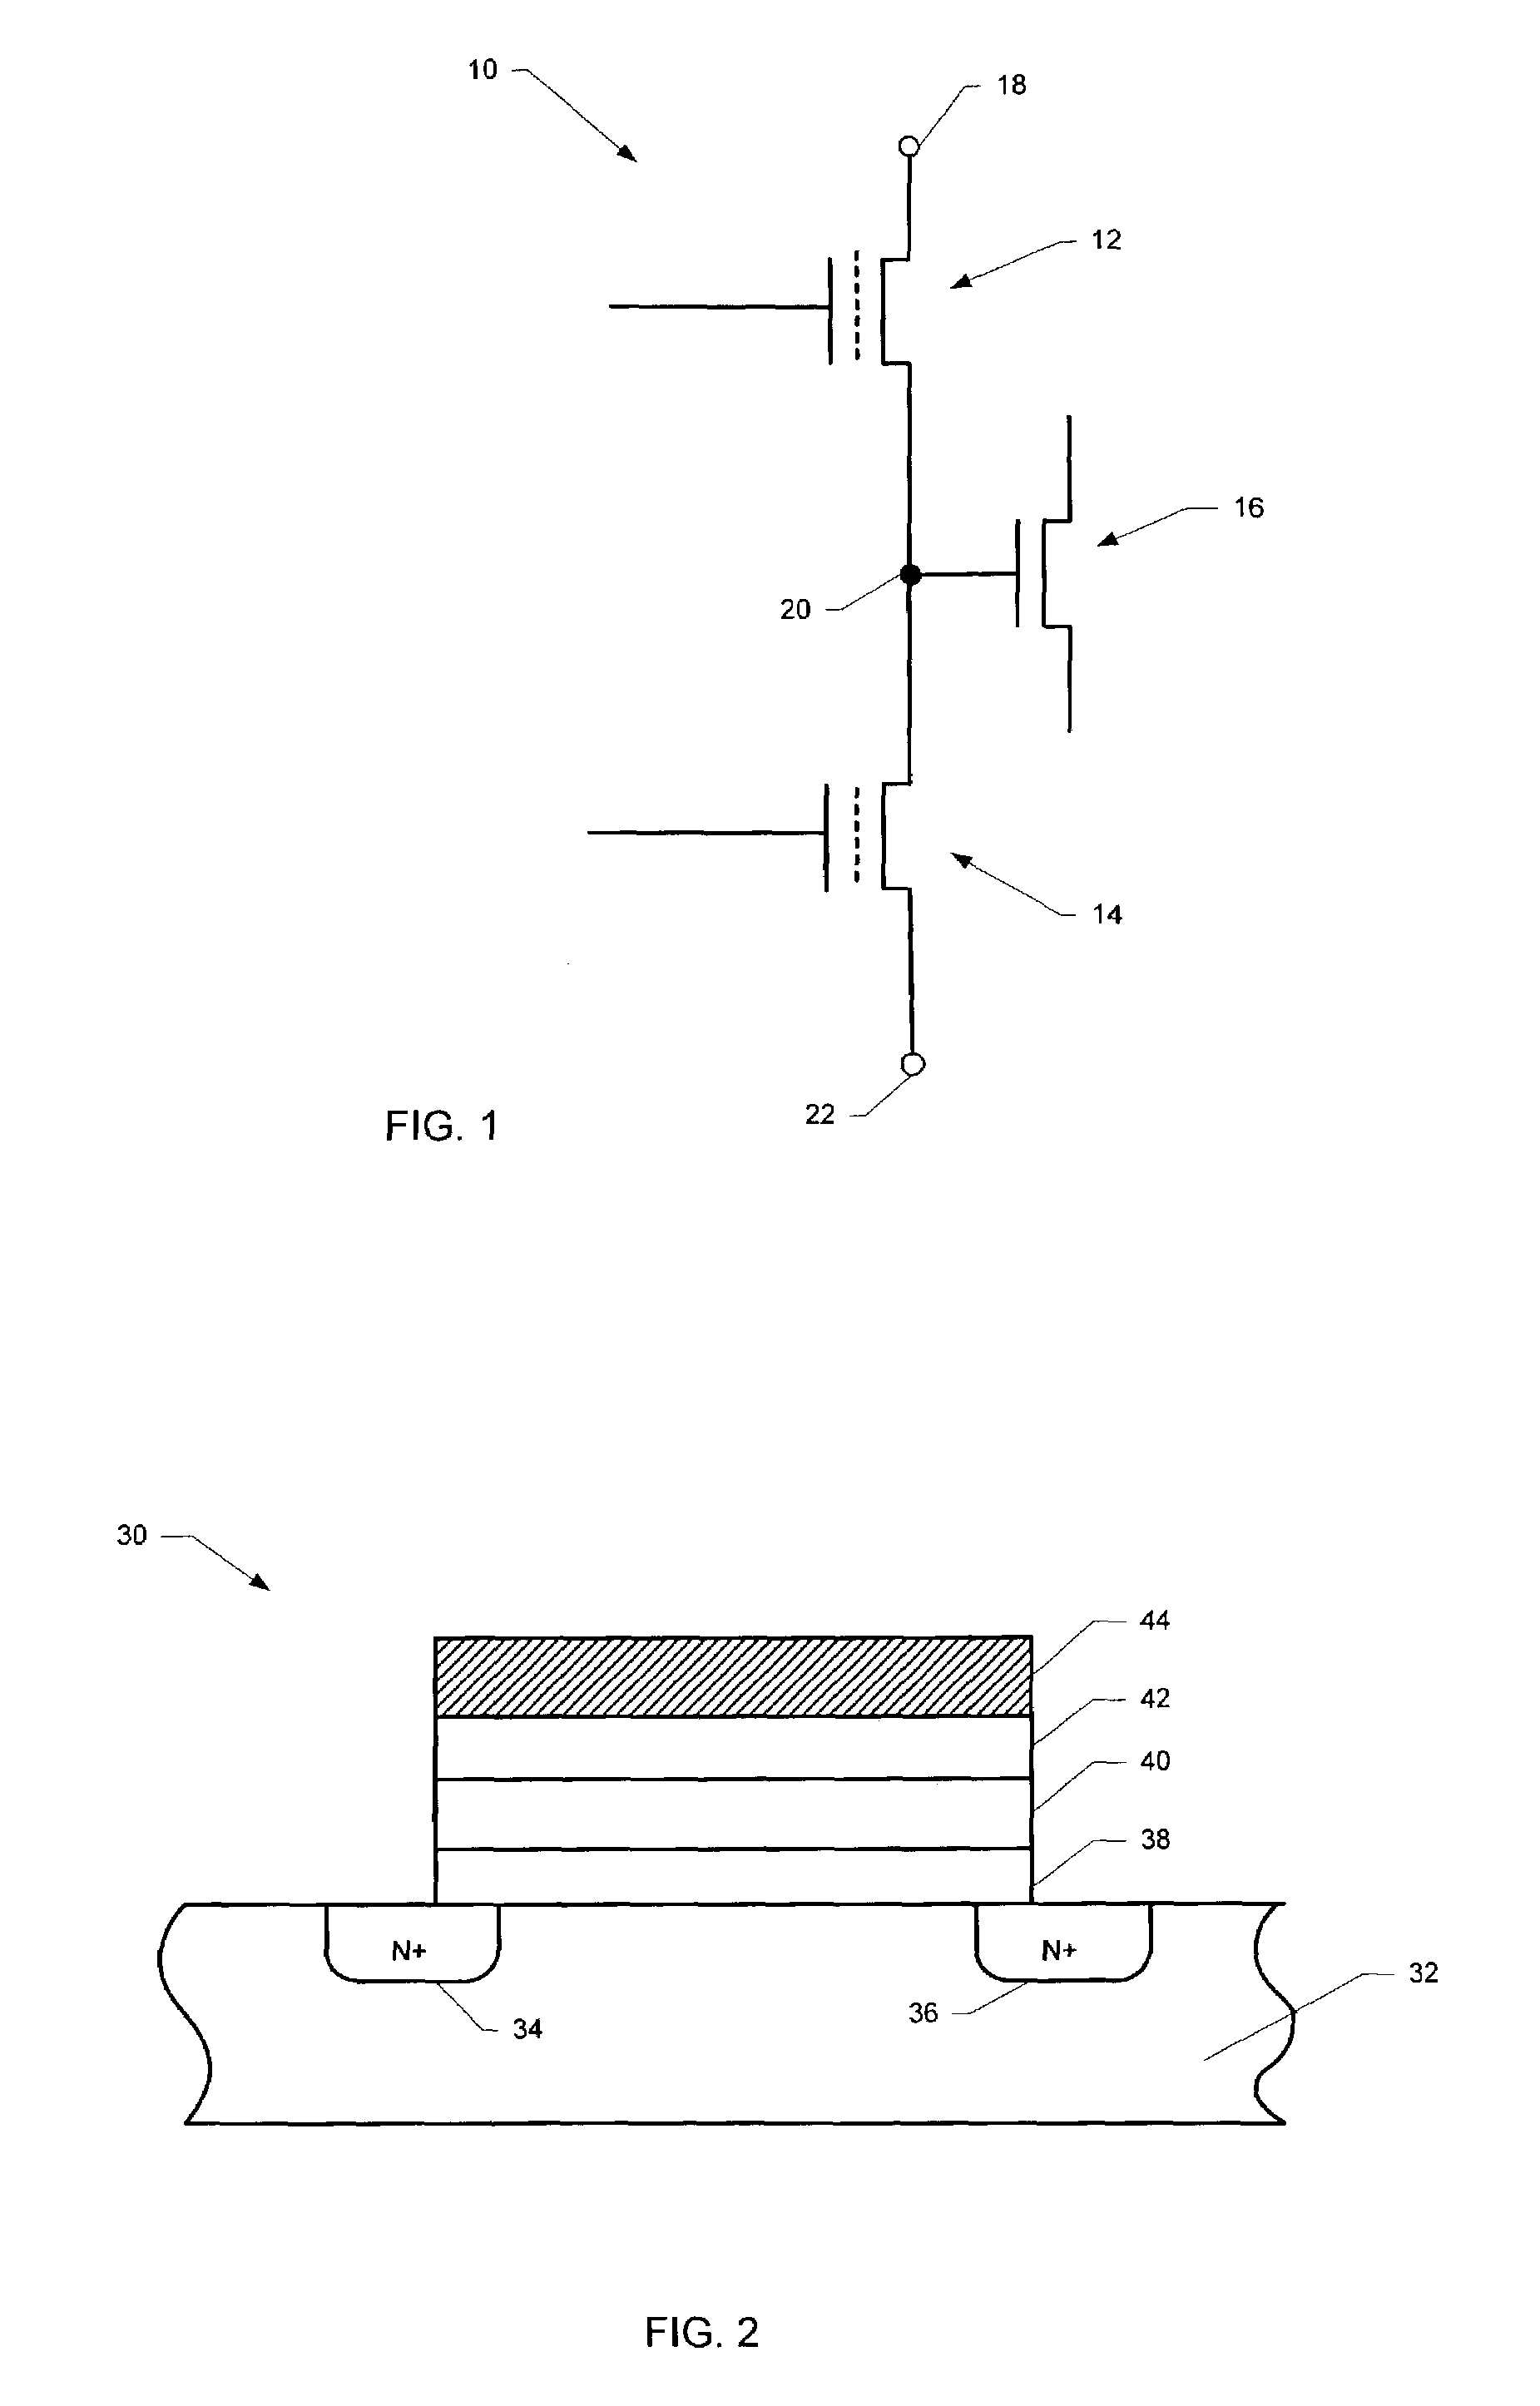 Methods of redundancy in a floating trap memory element based field programmable gate array